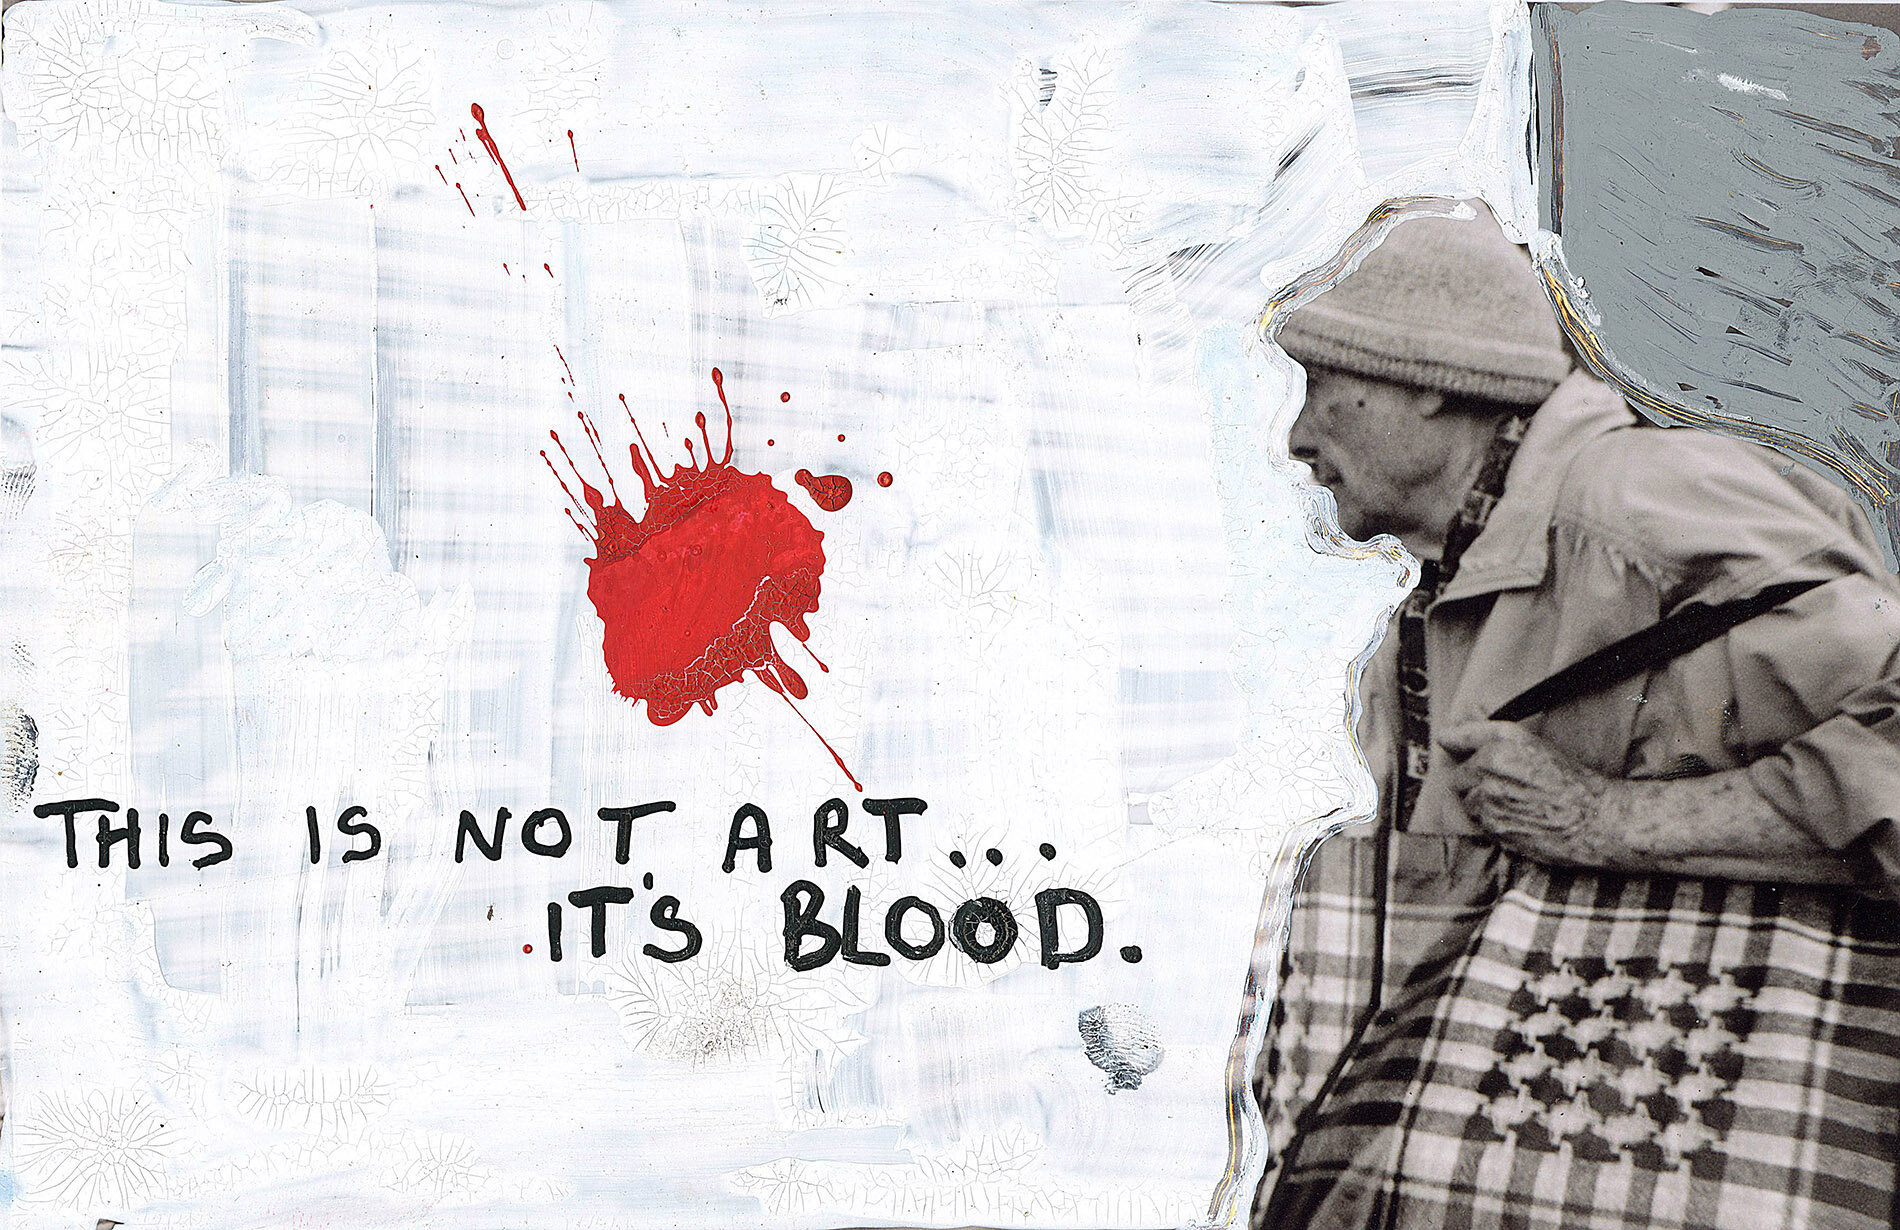  ‘This is not Art. Its Blood’ 2019, Berlin, Inkjet photograph &amp; Acrylic, 10x15cm 